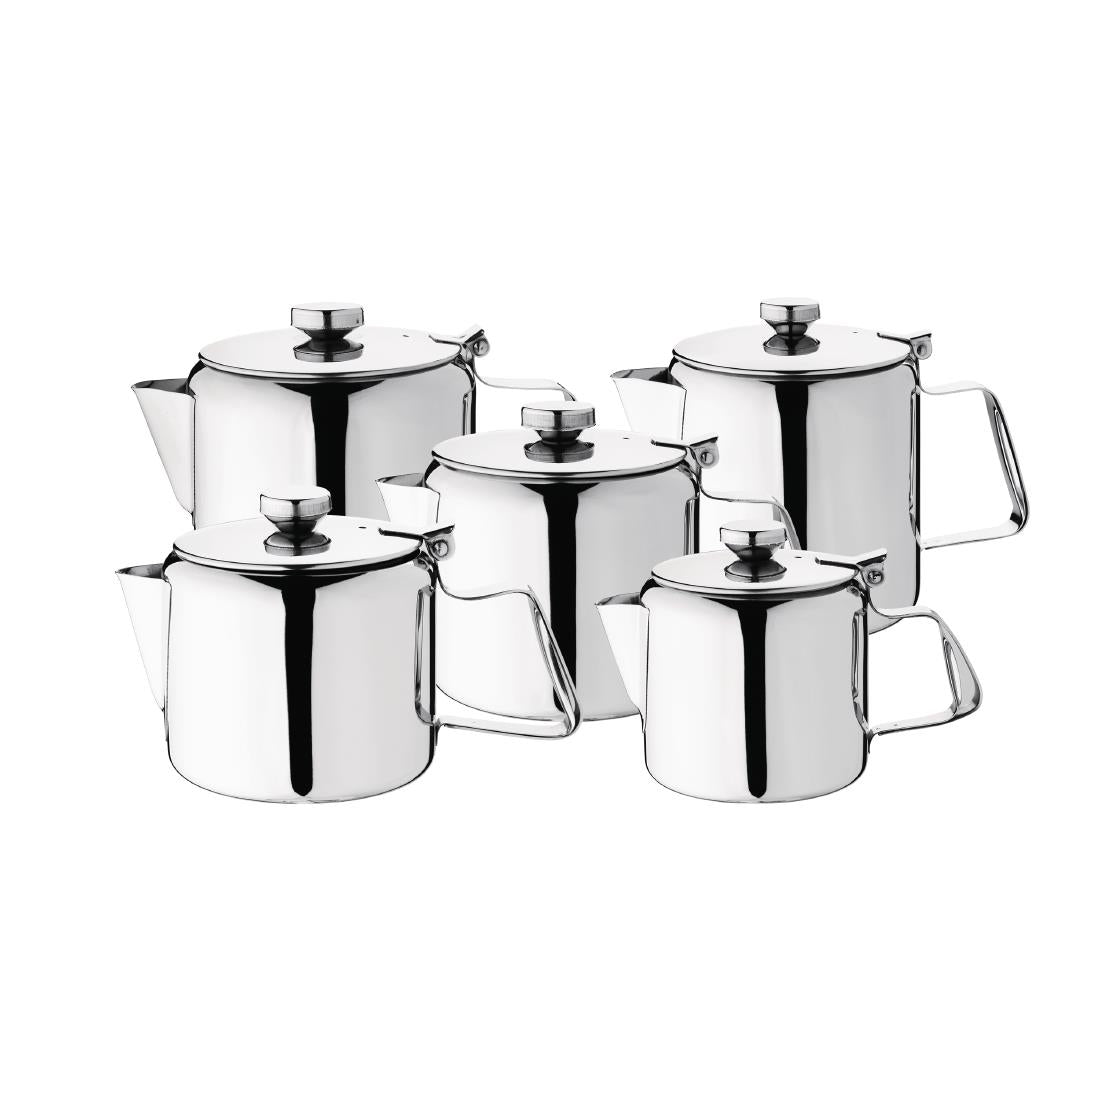 Olympia Concorde Stainless Steel Teapot 410ml